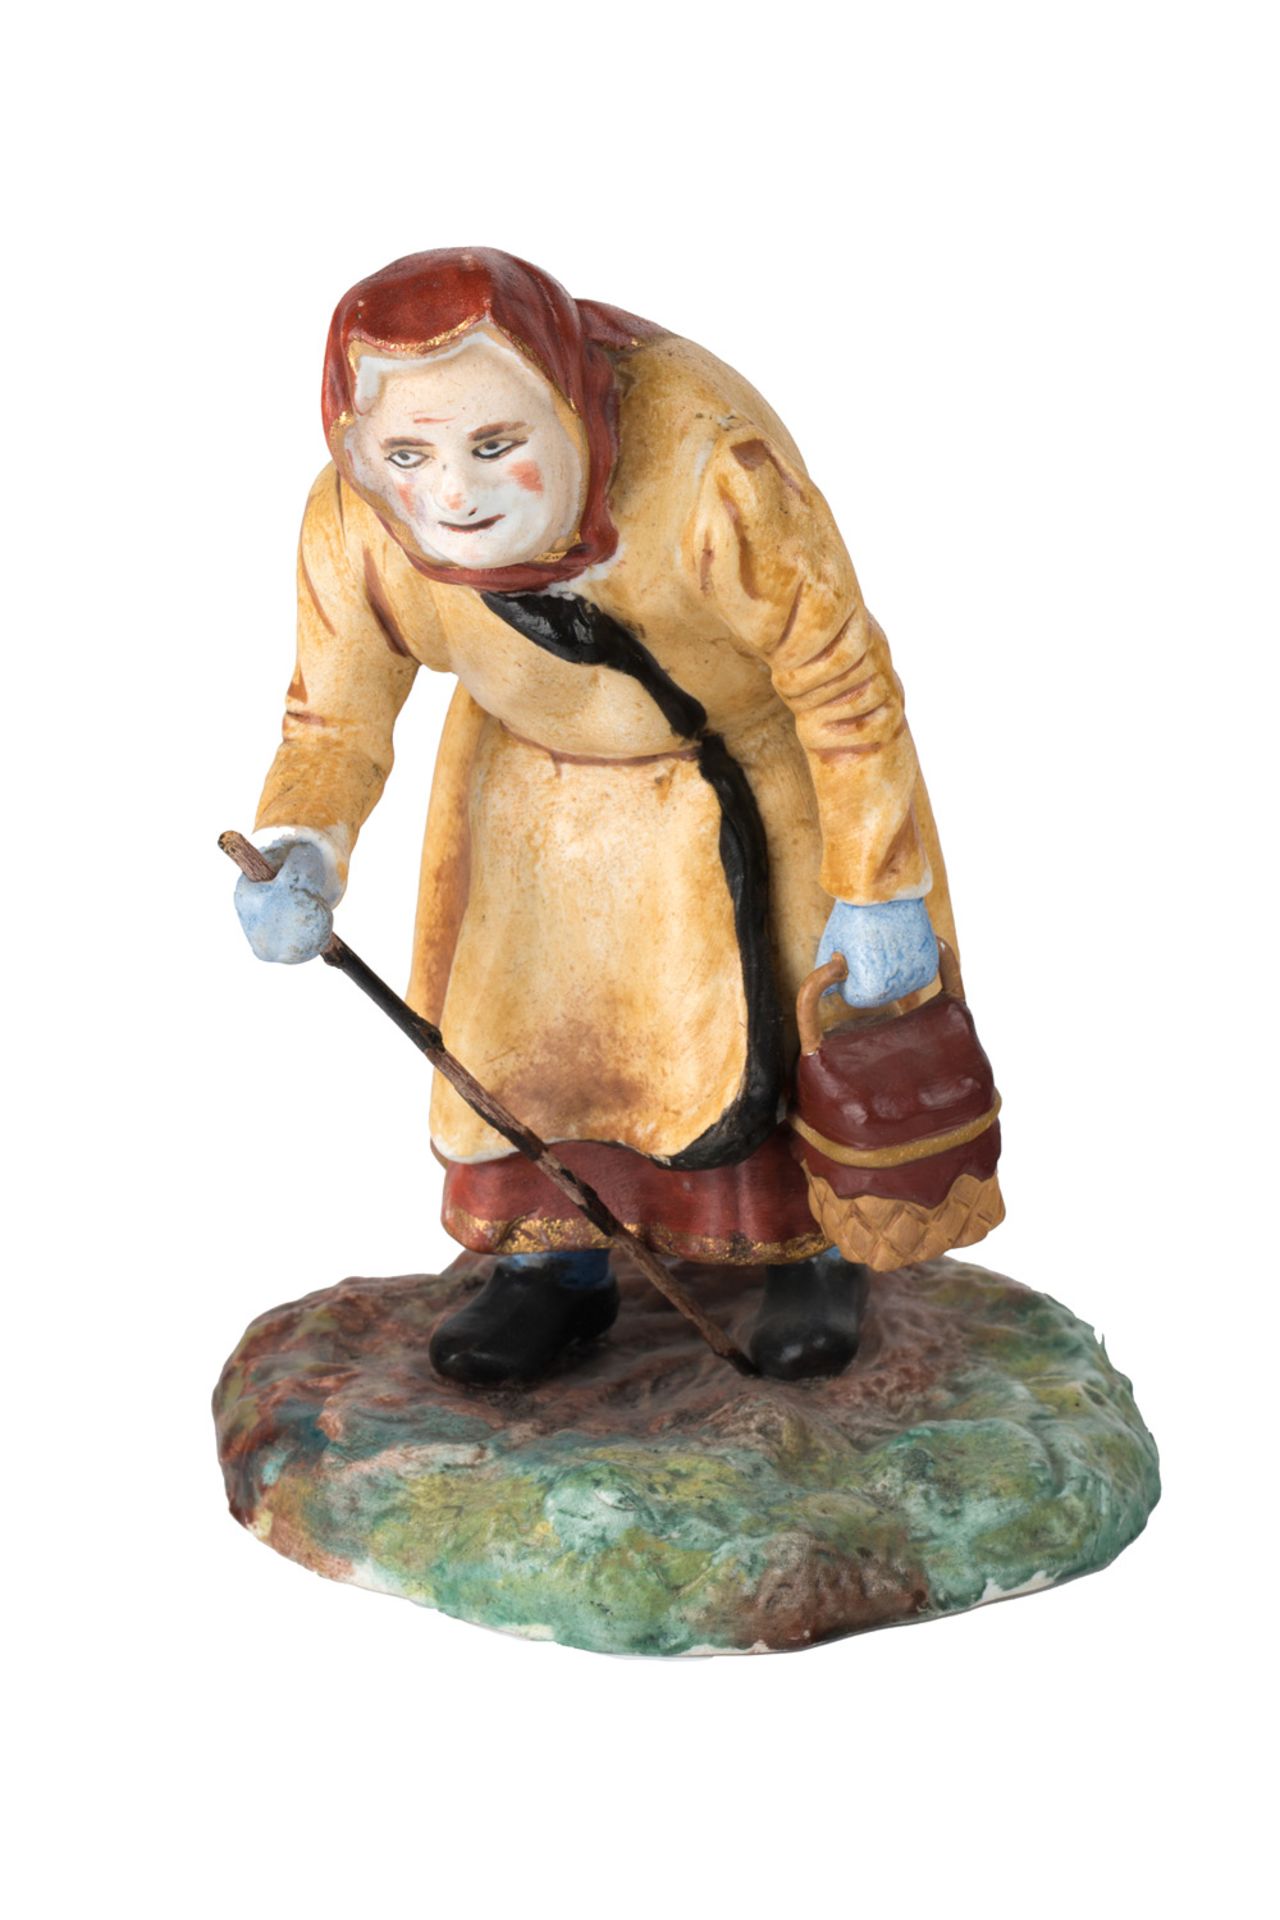 A RUSSIAN PORCELAIN FIGURE OF AN OLD, HUNCHED-OVER PEASANT WOMAN, GARDNER PORCELAIN FACTORY, MOSCOW